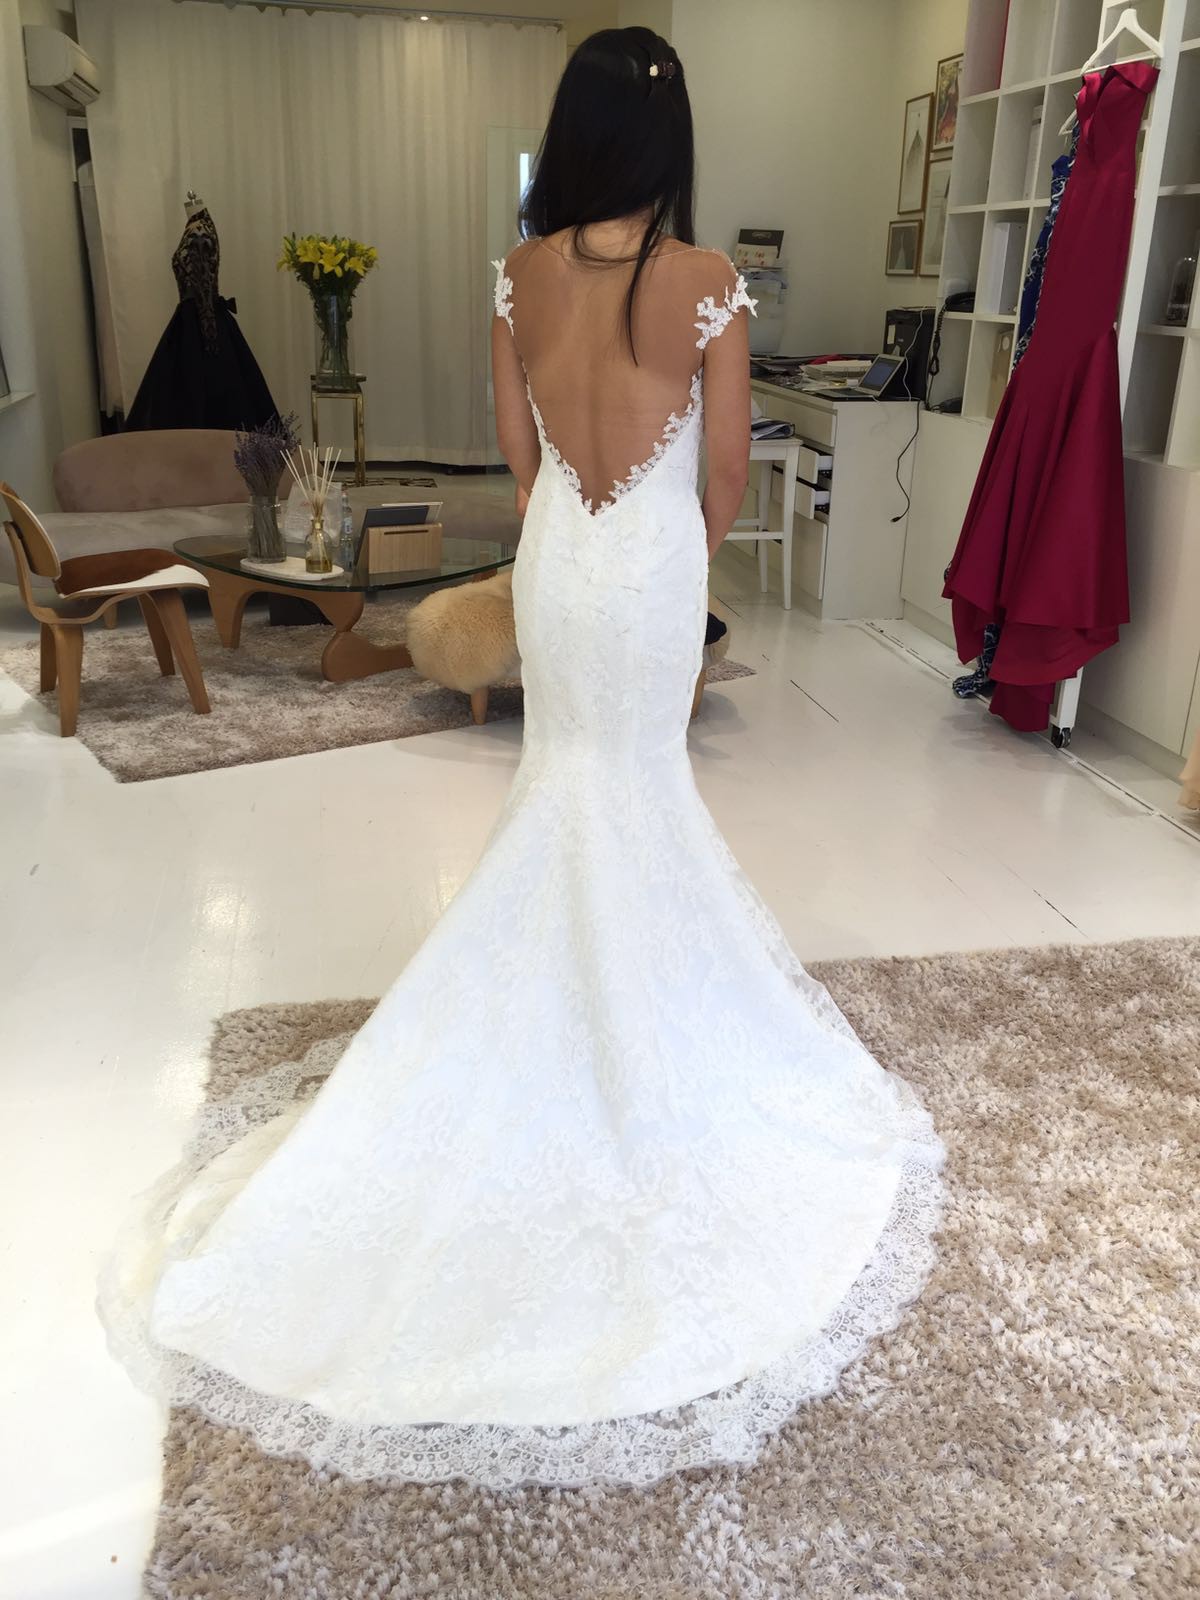 jessicacindy gown price